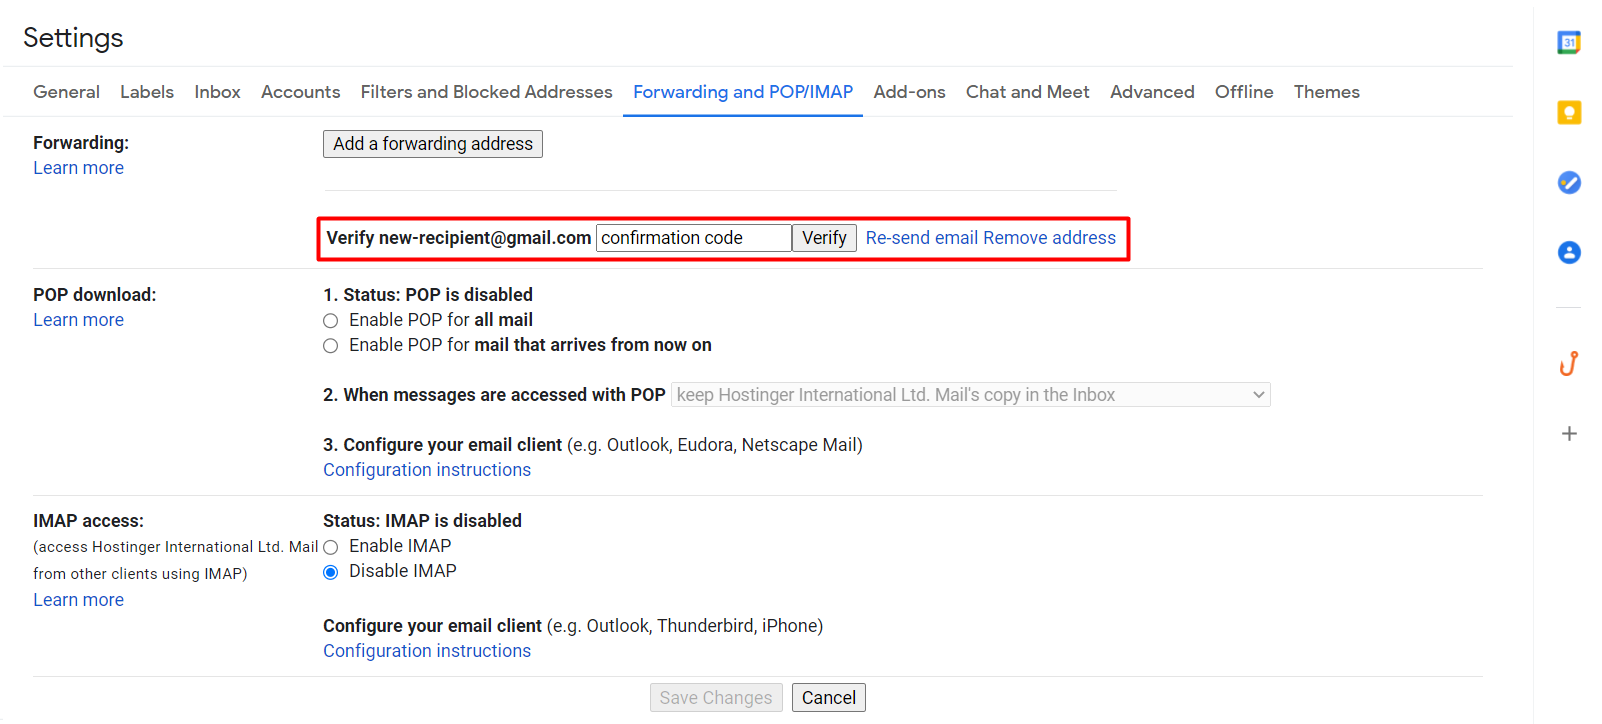 How to Turn Off Auto Forwarding in Outlook?